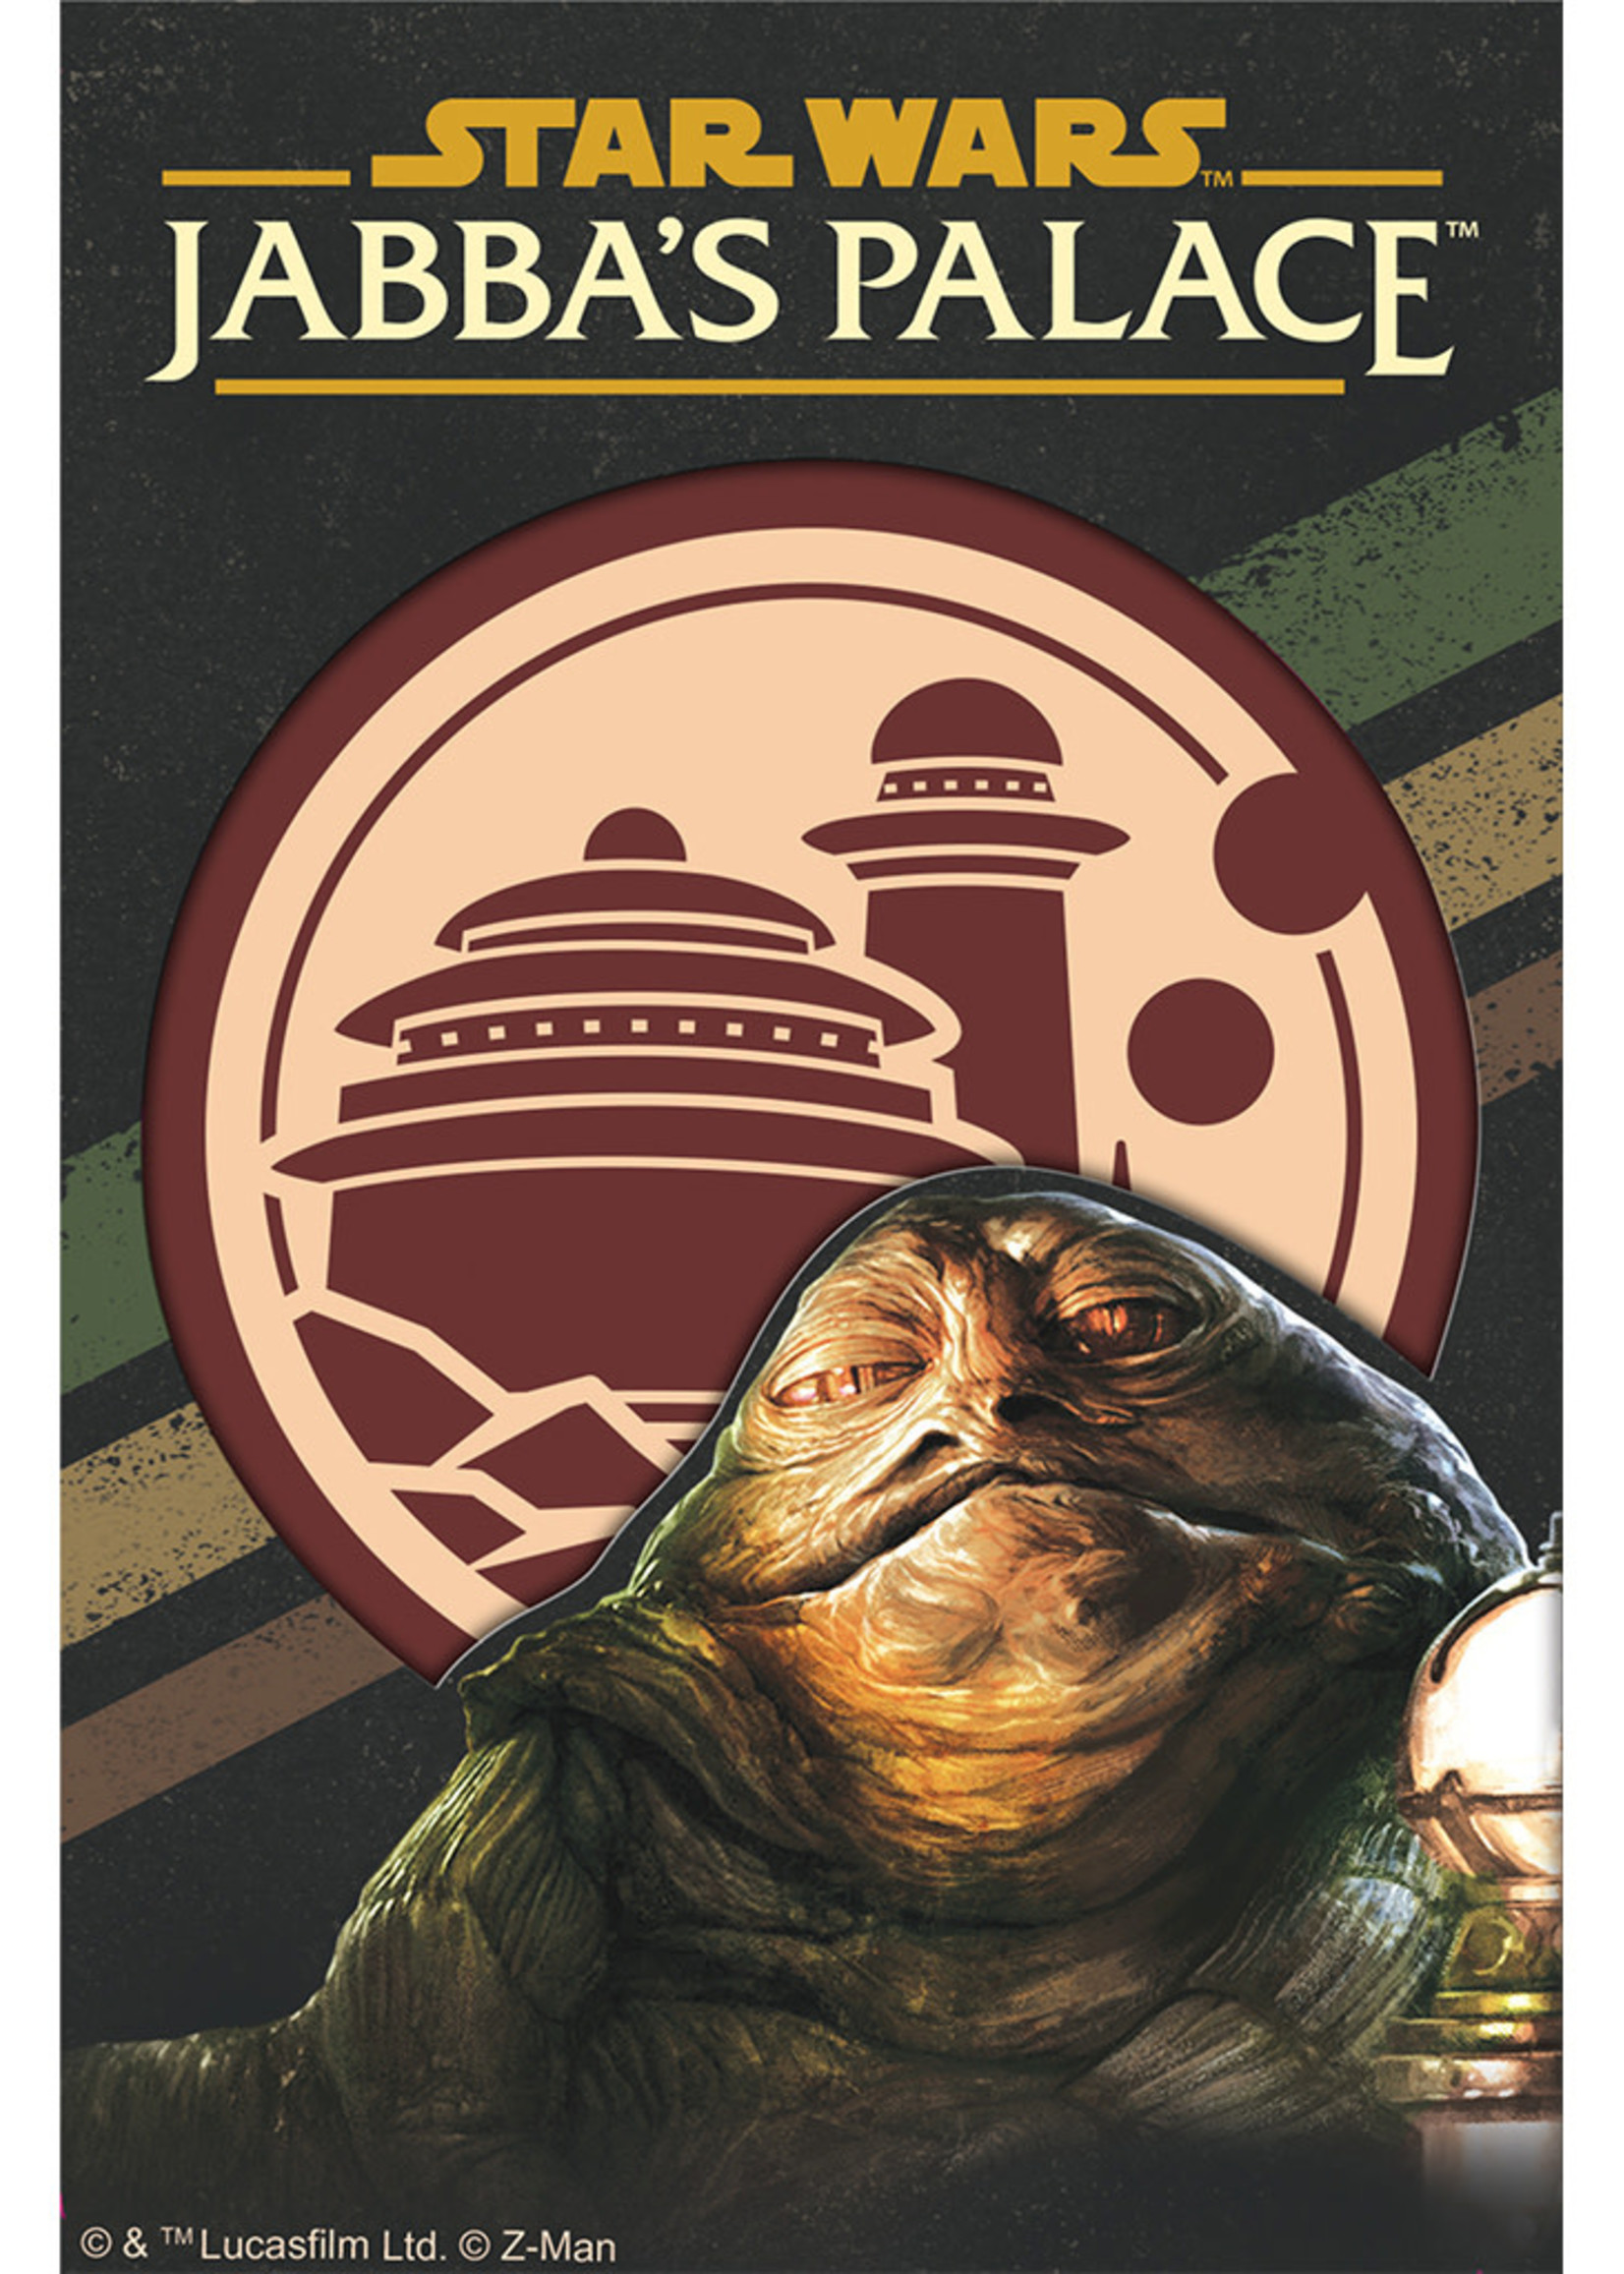 Jabba's Palace: A Love Letter Game